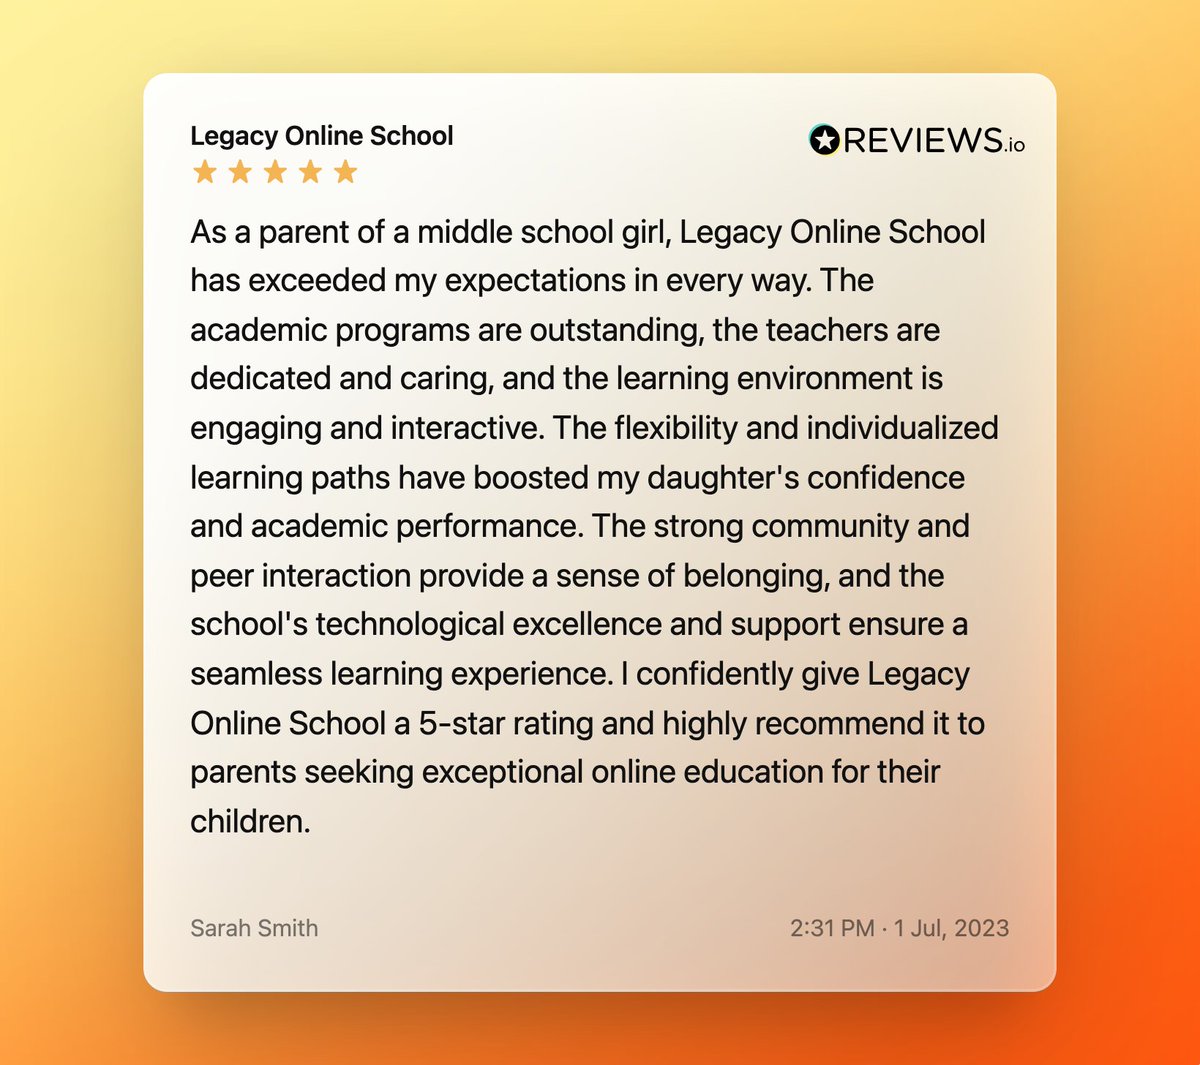 🌟 We are thrilled to receive such an amazing review from one of our parents! 🎉📚

#LegacyOnlineSchool #ExceptionalEducation #ParentFeedback #OnlineLearning #EngagingEnvironment #EmpoweringStudents